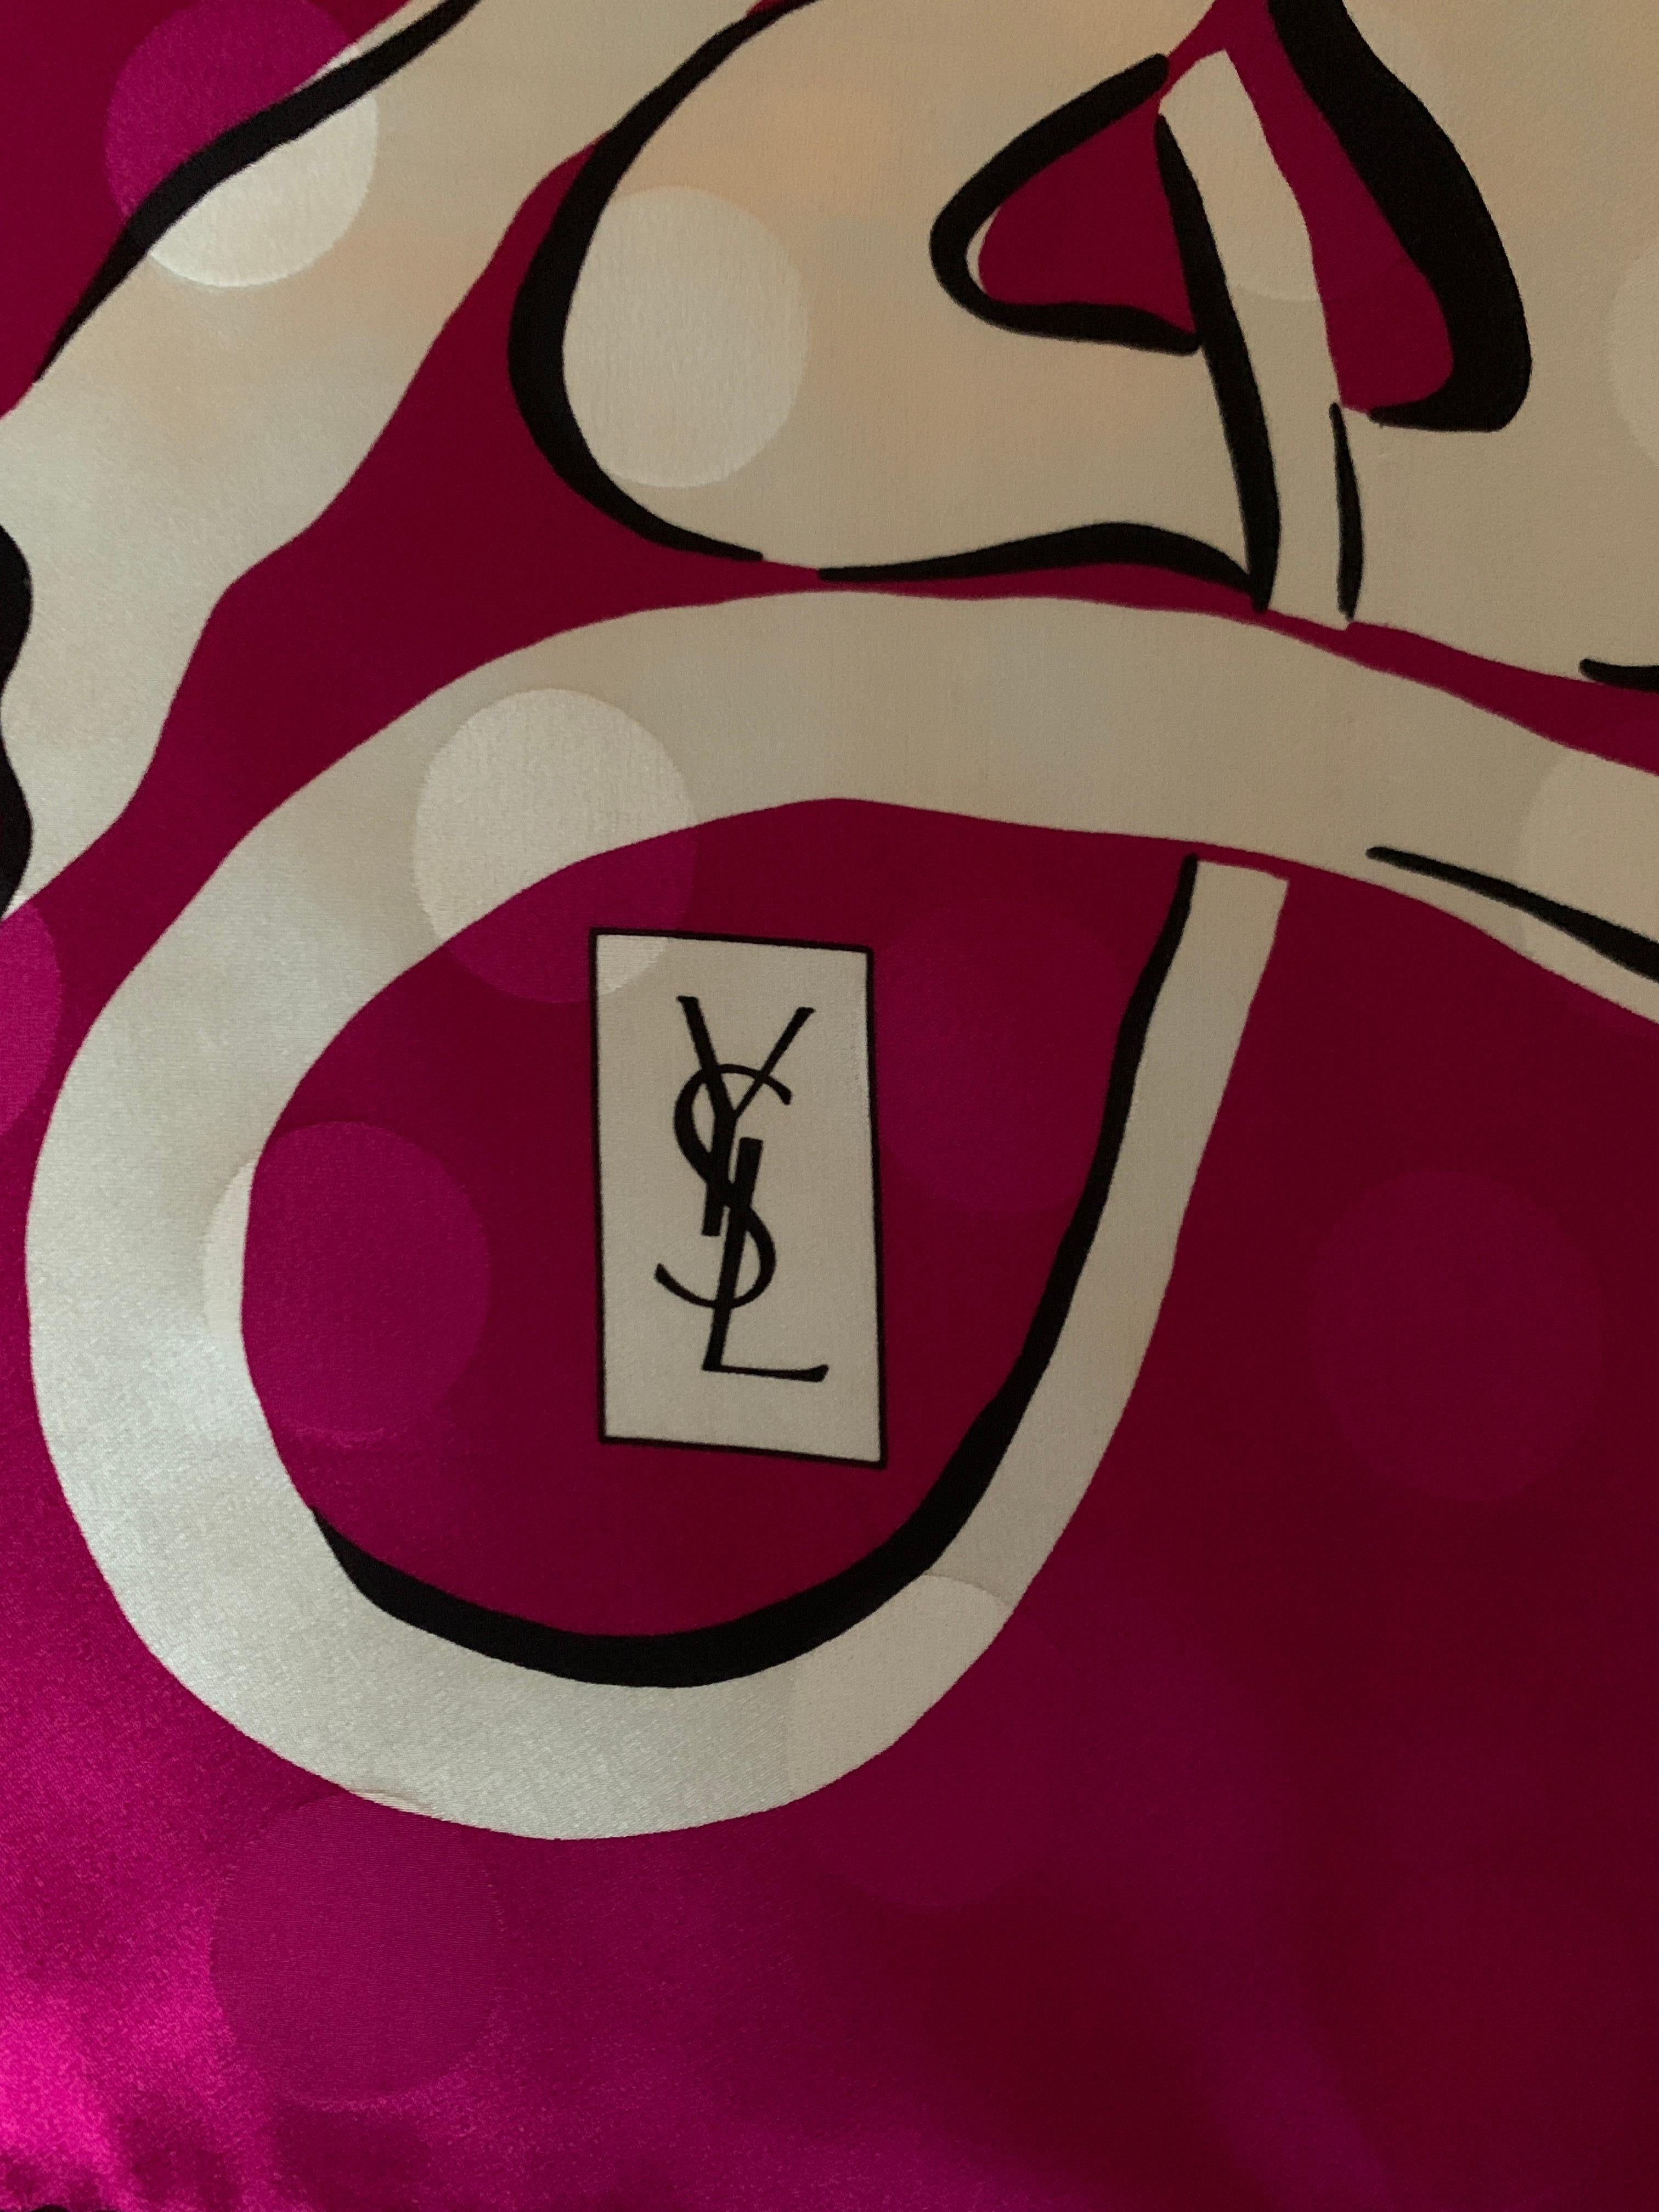 Yves Saint Laurent Vintage Silk Scarf in Fuchsia Pink Dove and Ribbon Print 3